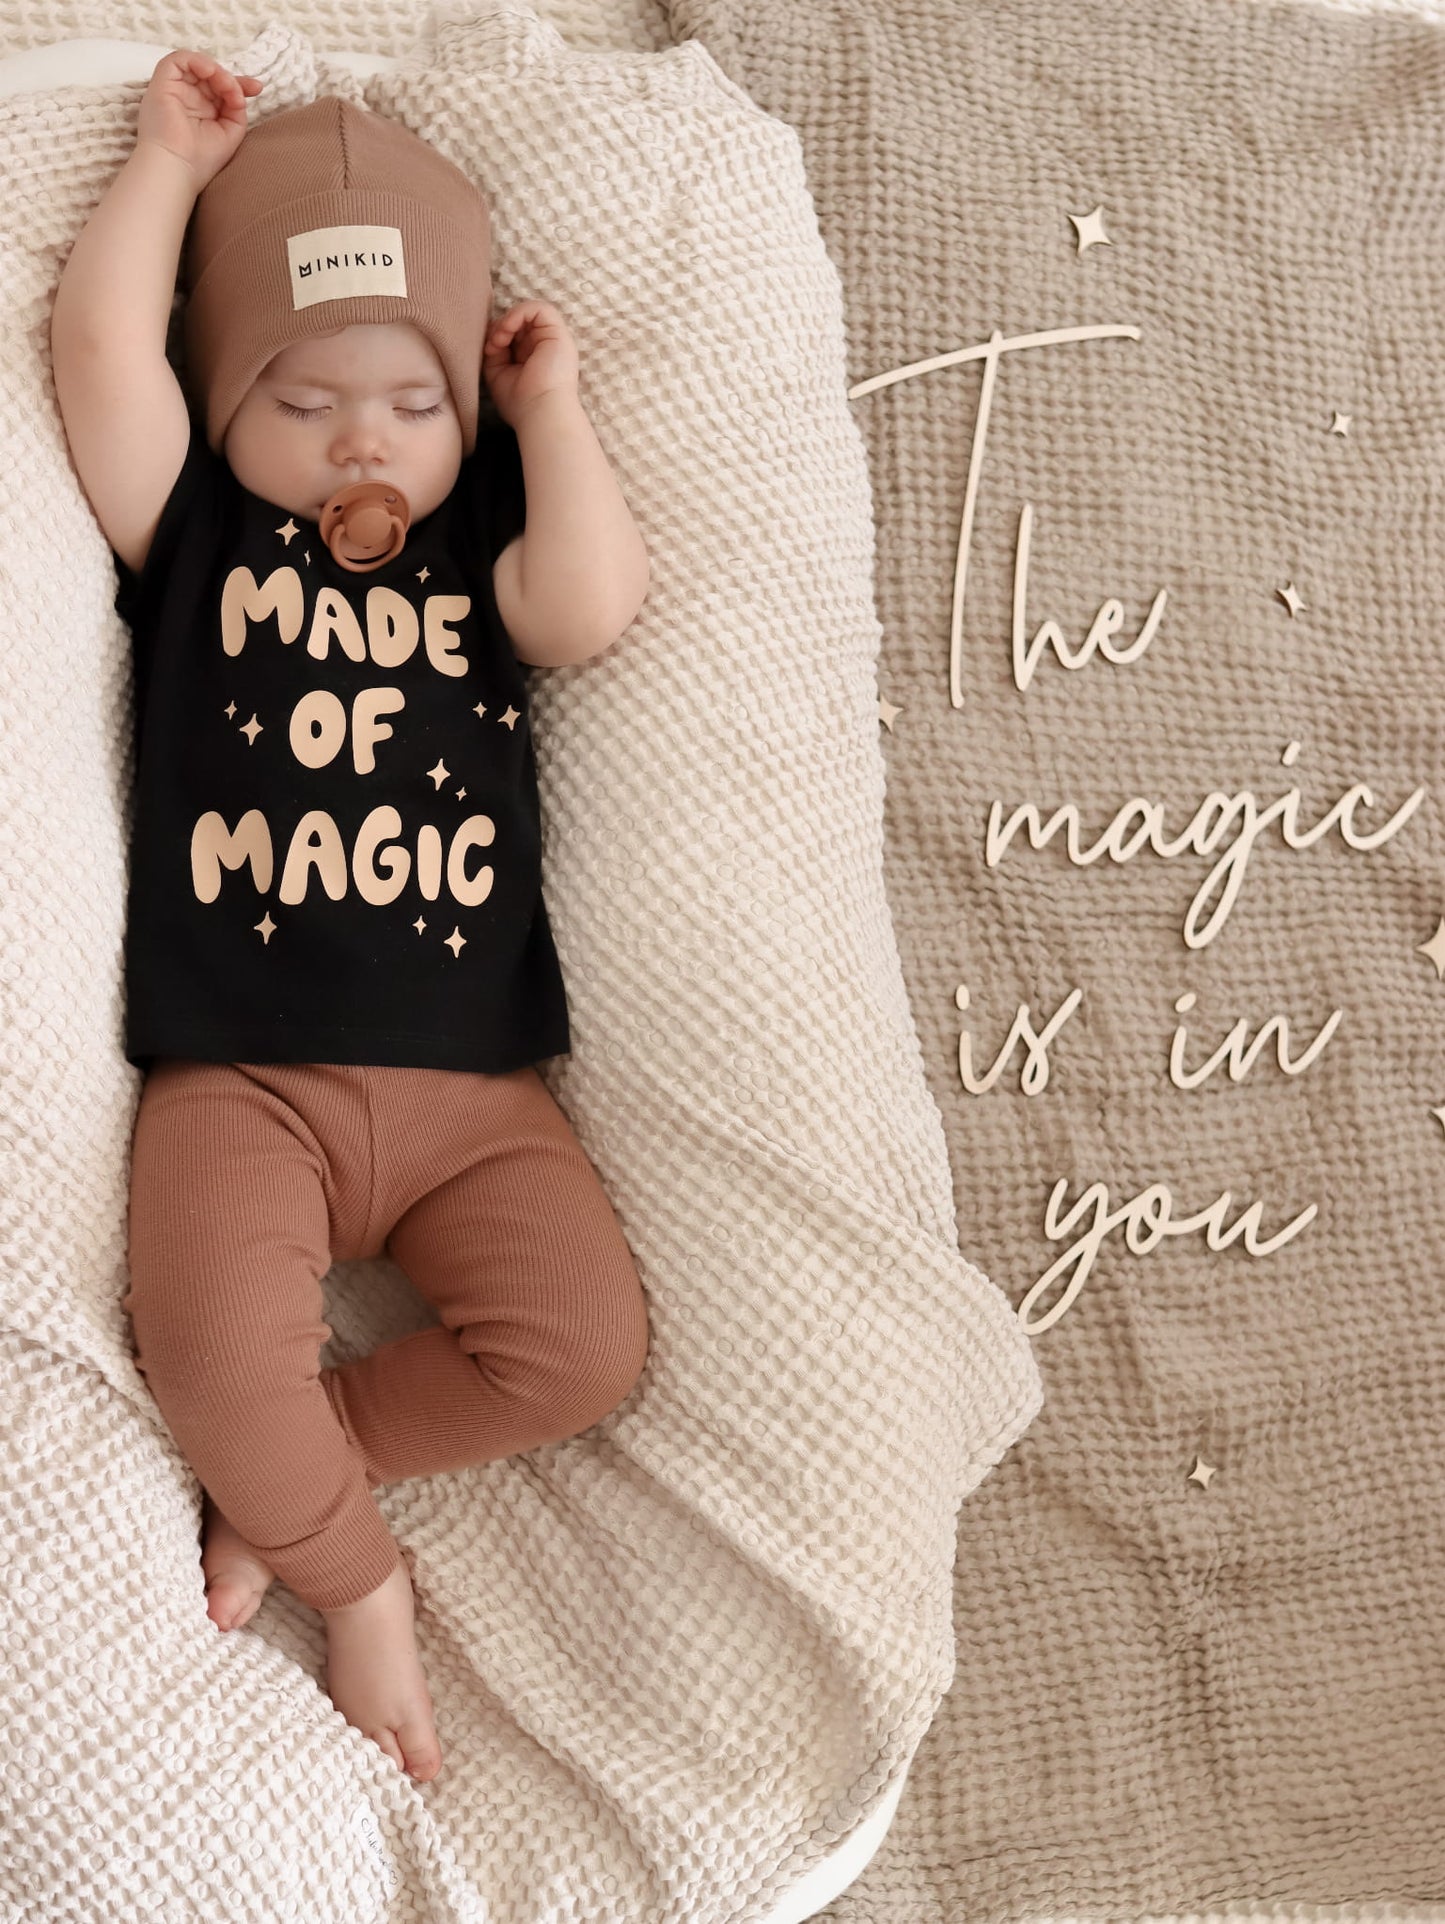 Napis „The magic is in you”